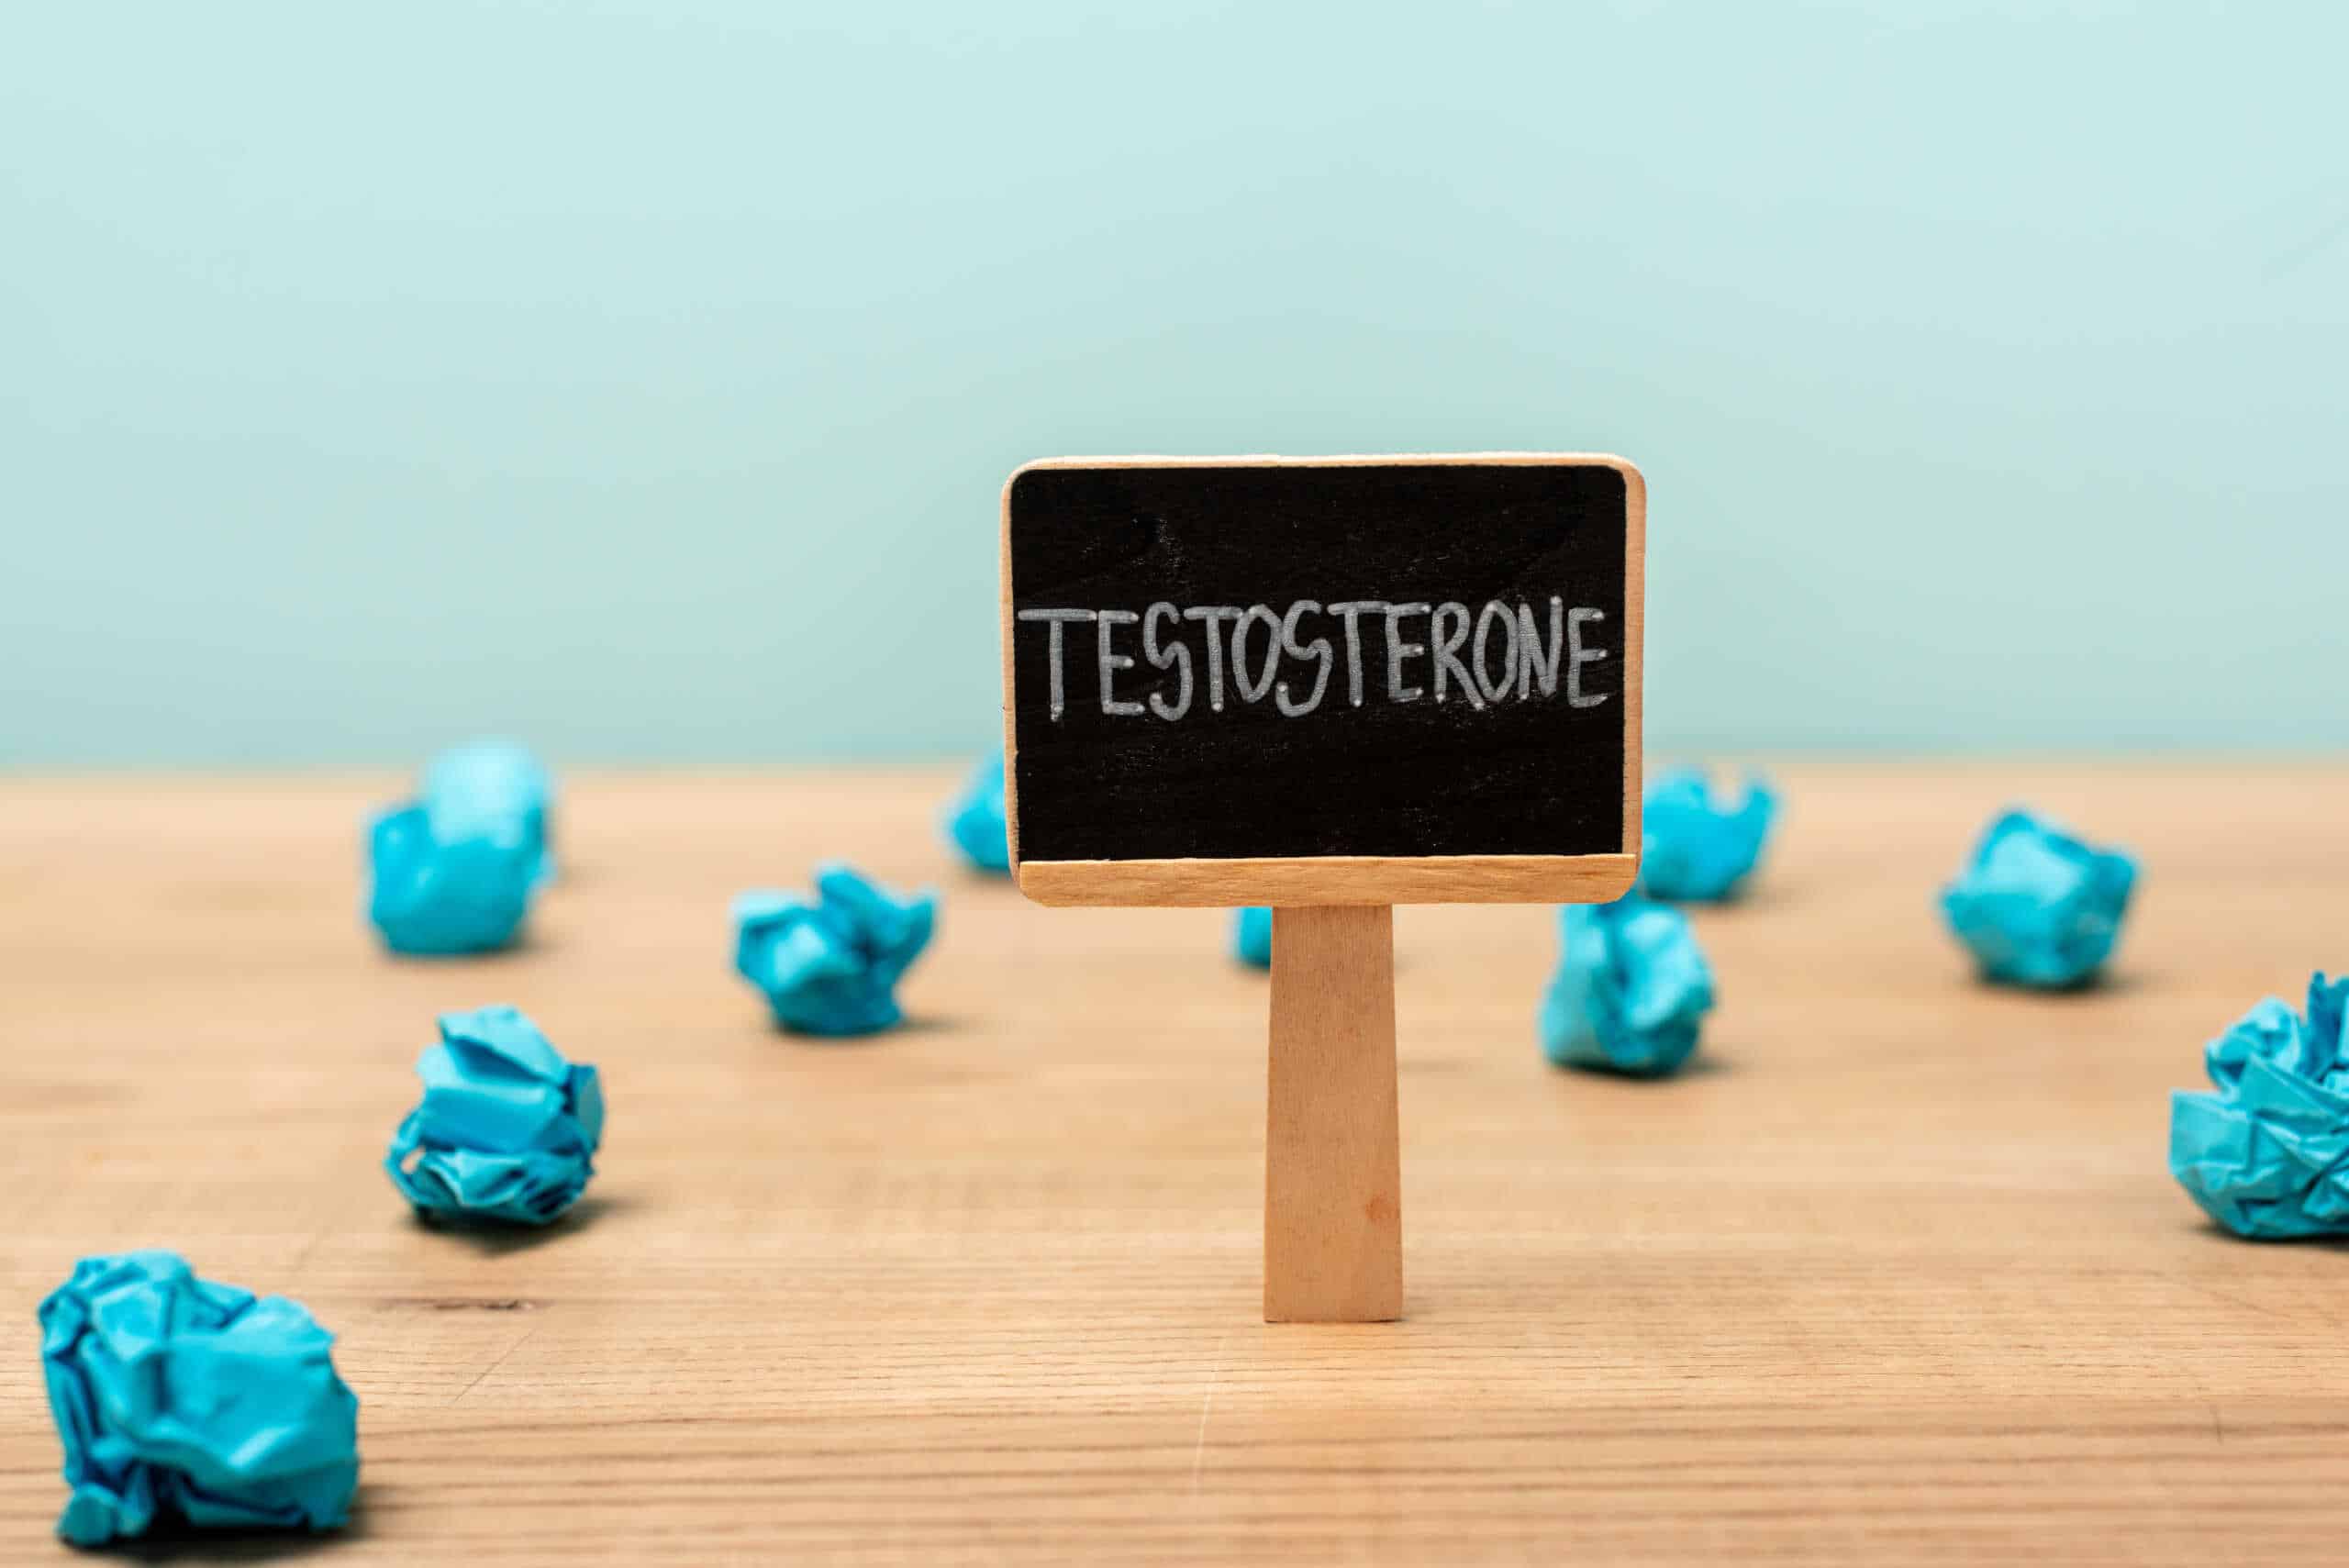 Does Blue Cross Blue Shield Cover Testosterone Treatment?